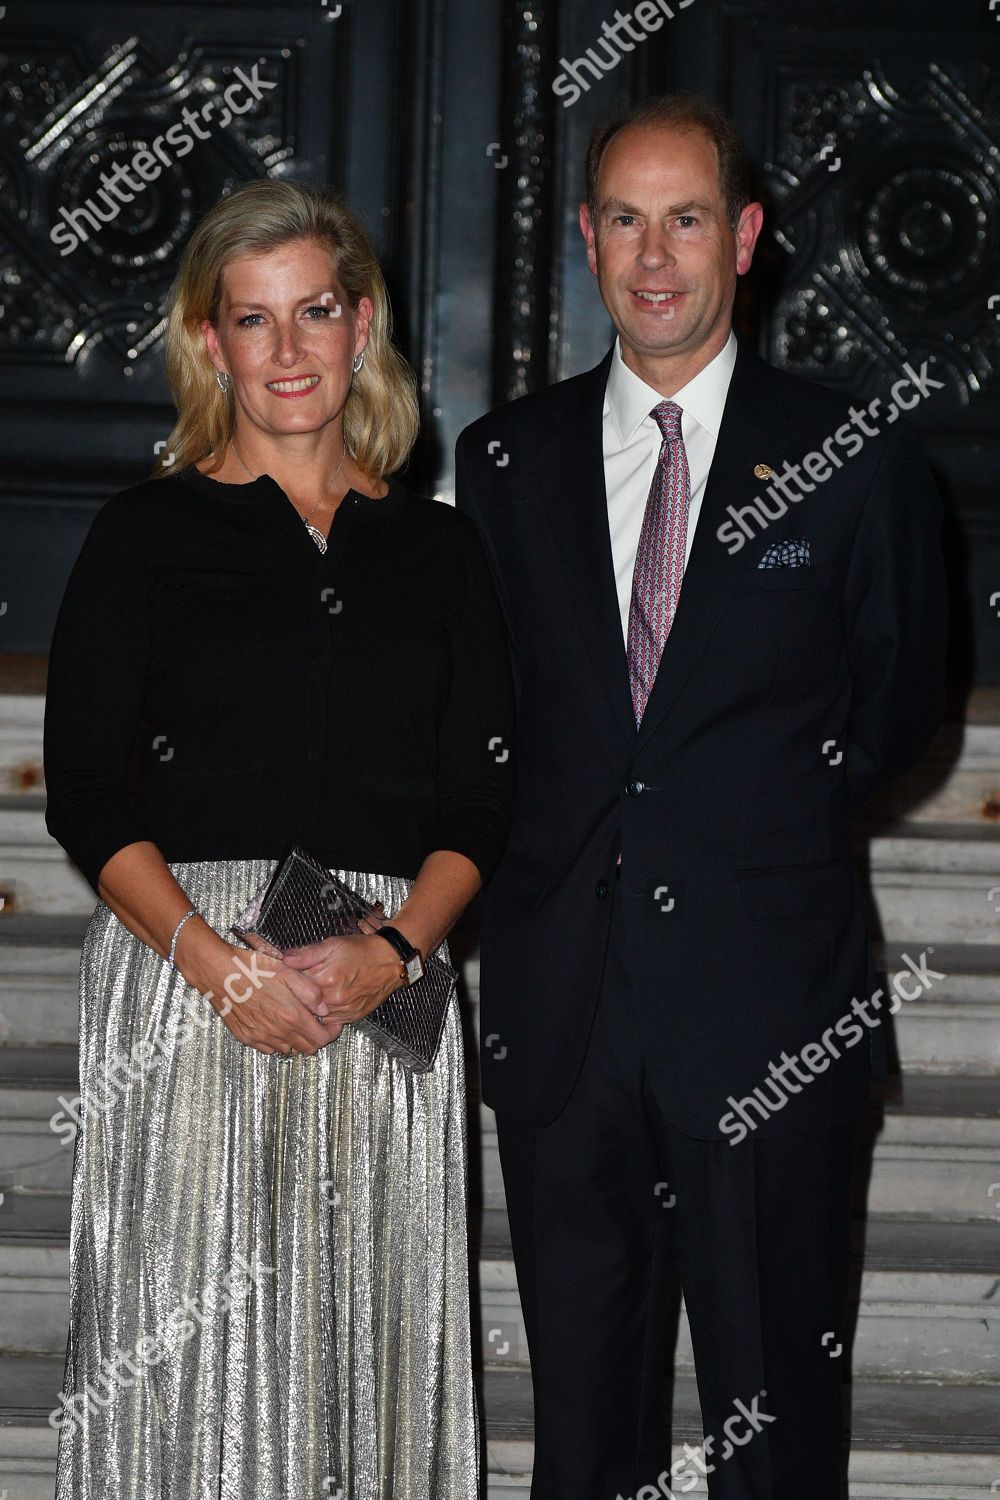 prince-edward-and-sophie-countess-of-wessex-visit-to-france-shutterstock-editorial-9907868at.jpg